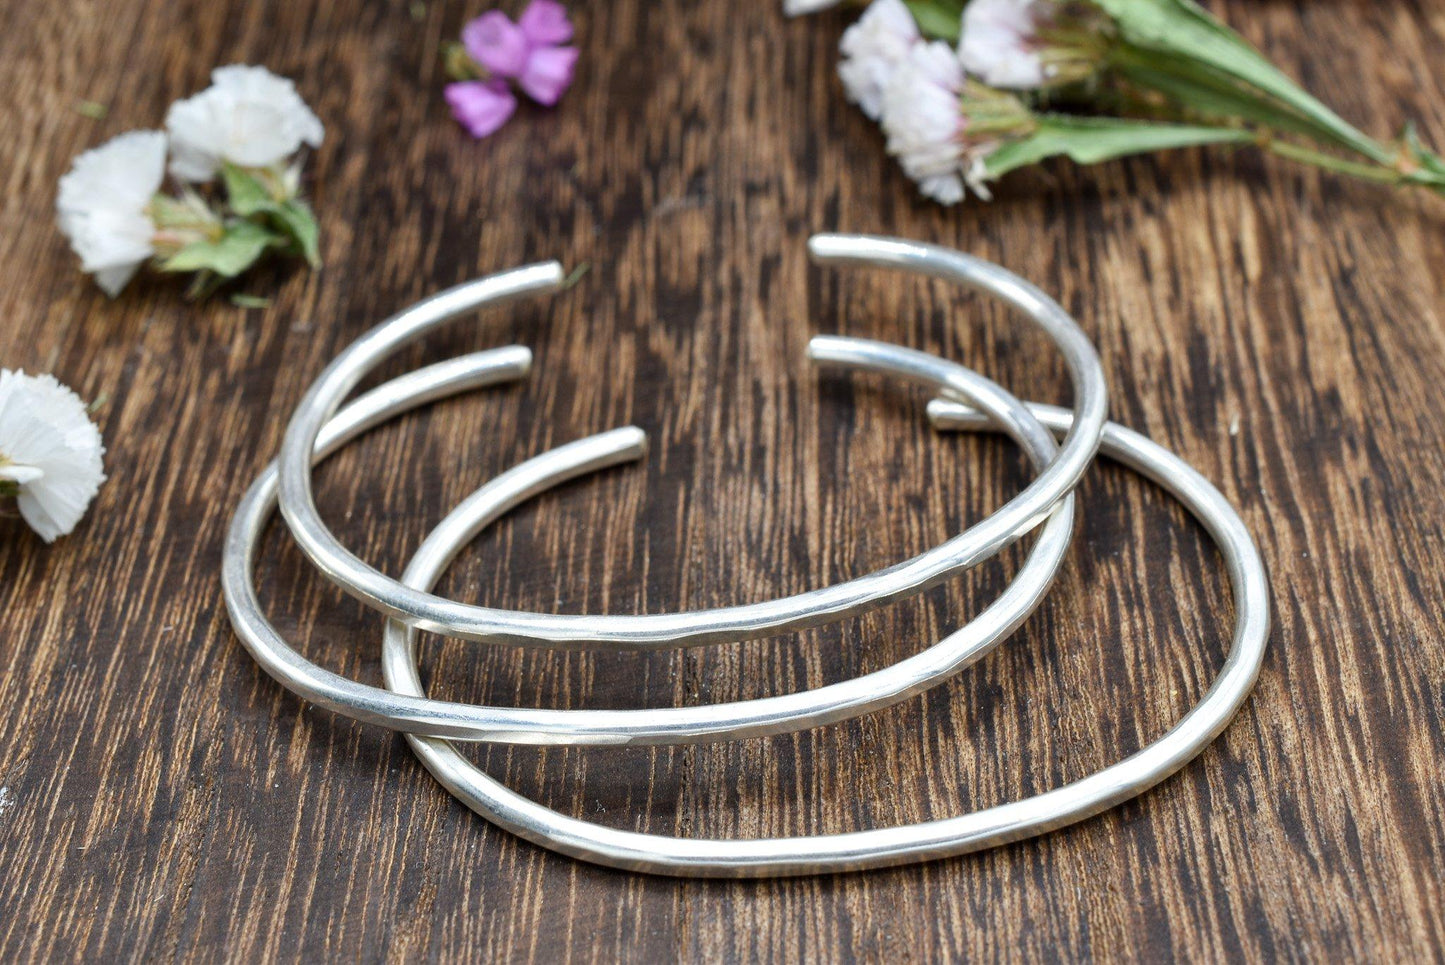 Hammered or Dashed Everyday Cuff Bracelets - Silver